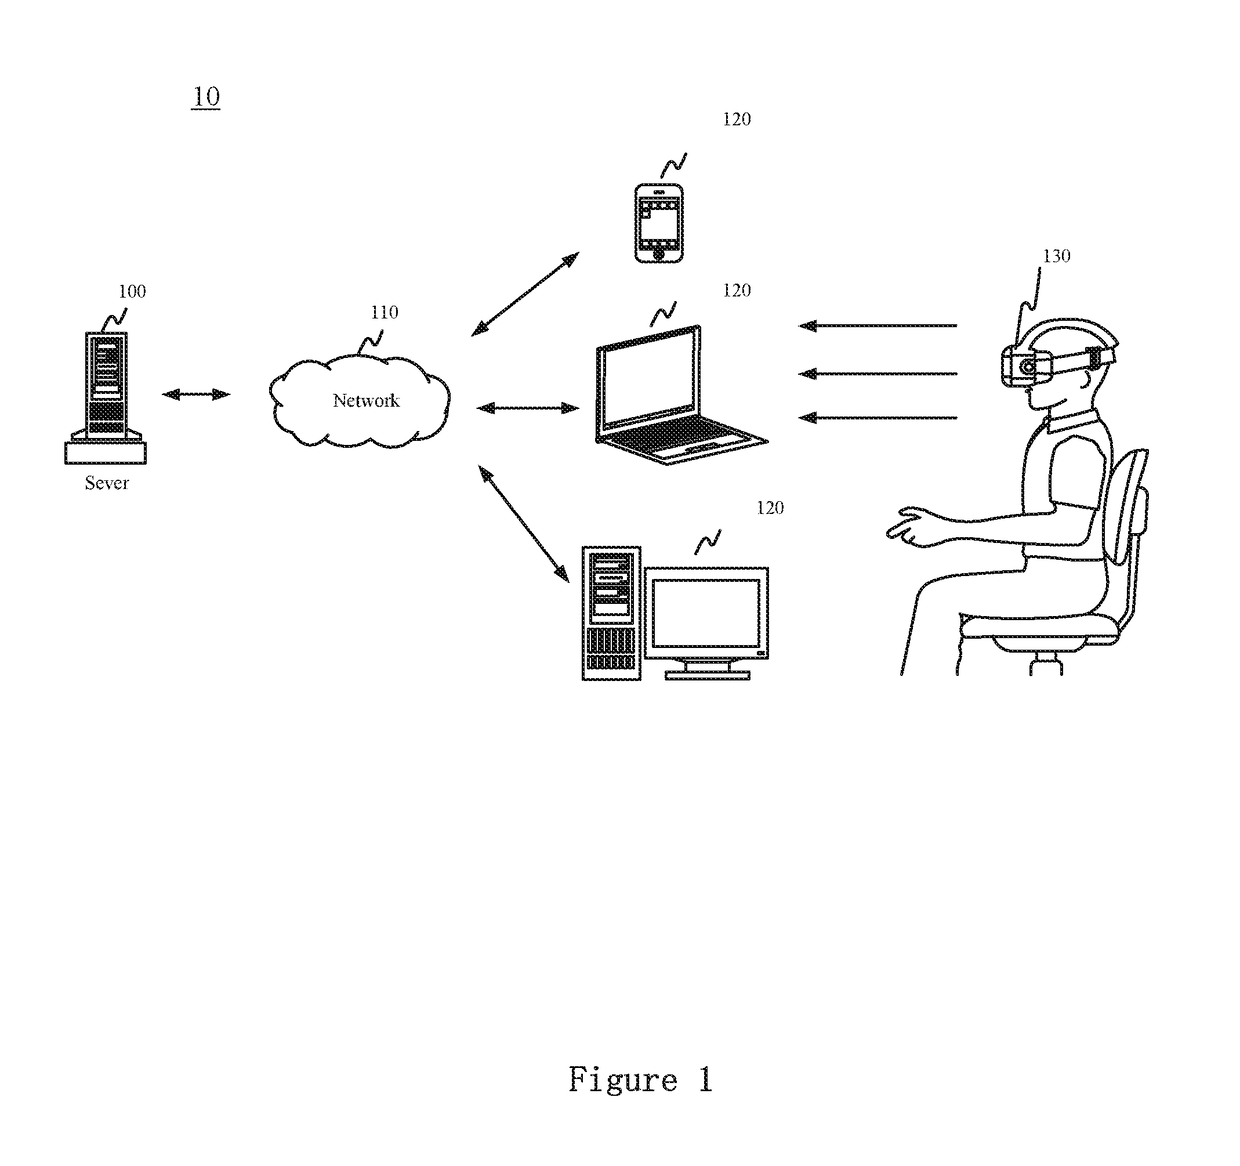 Method and System for Real-Time Rendering Displaying High Resolution Virtual Reality (VR) Video